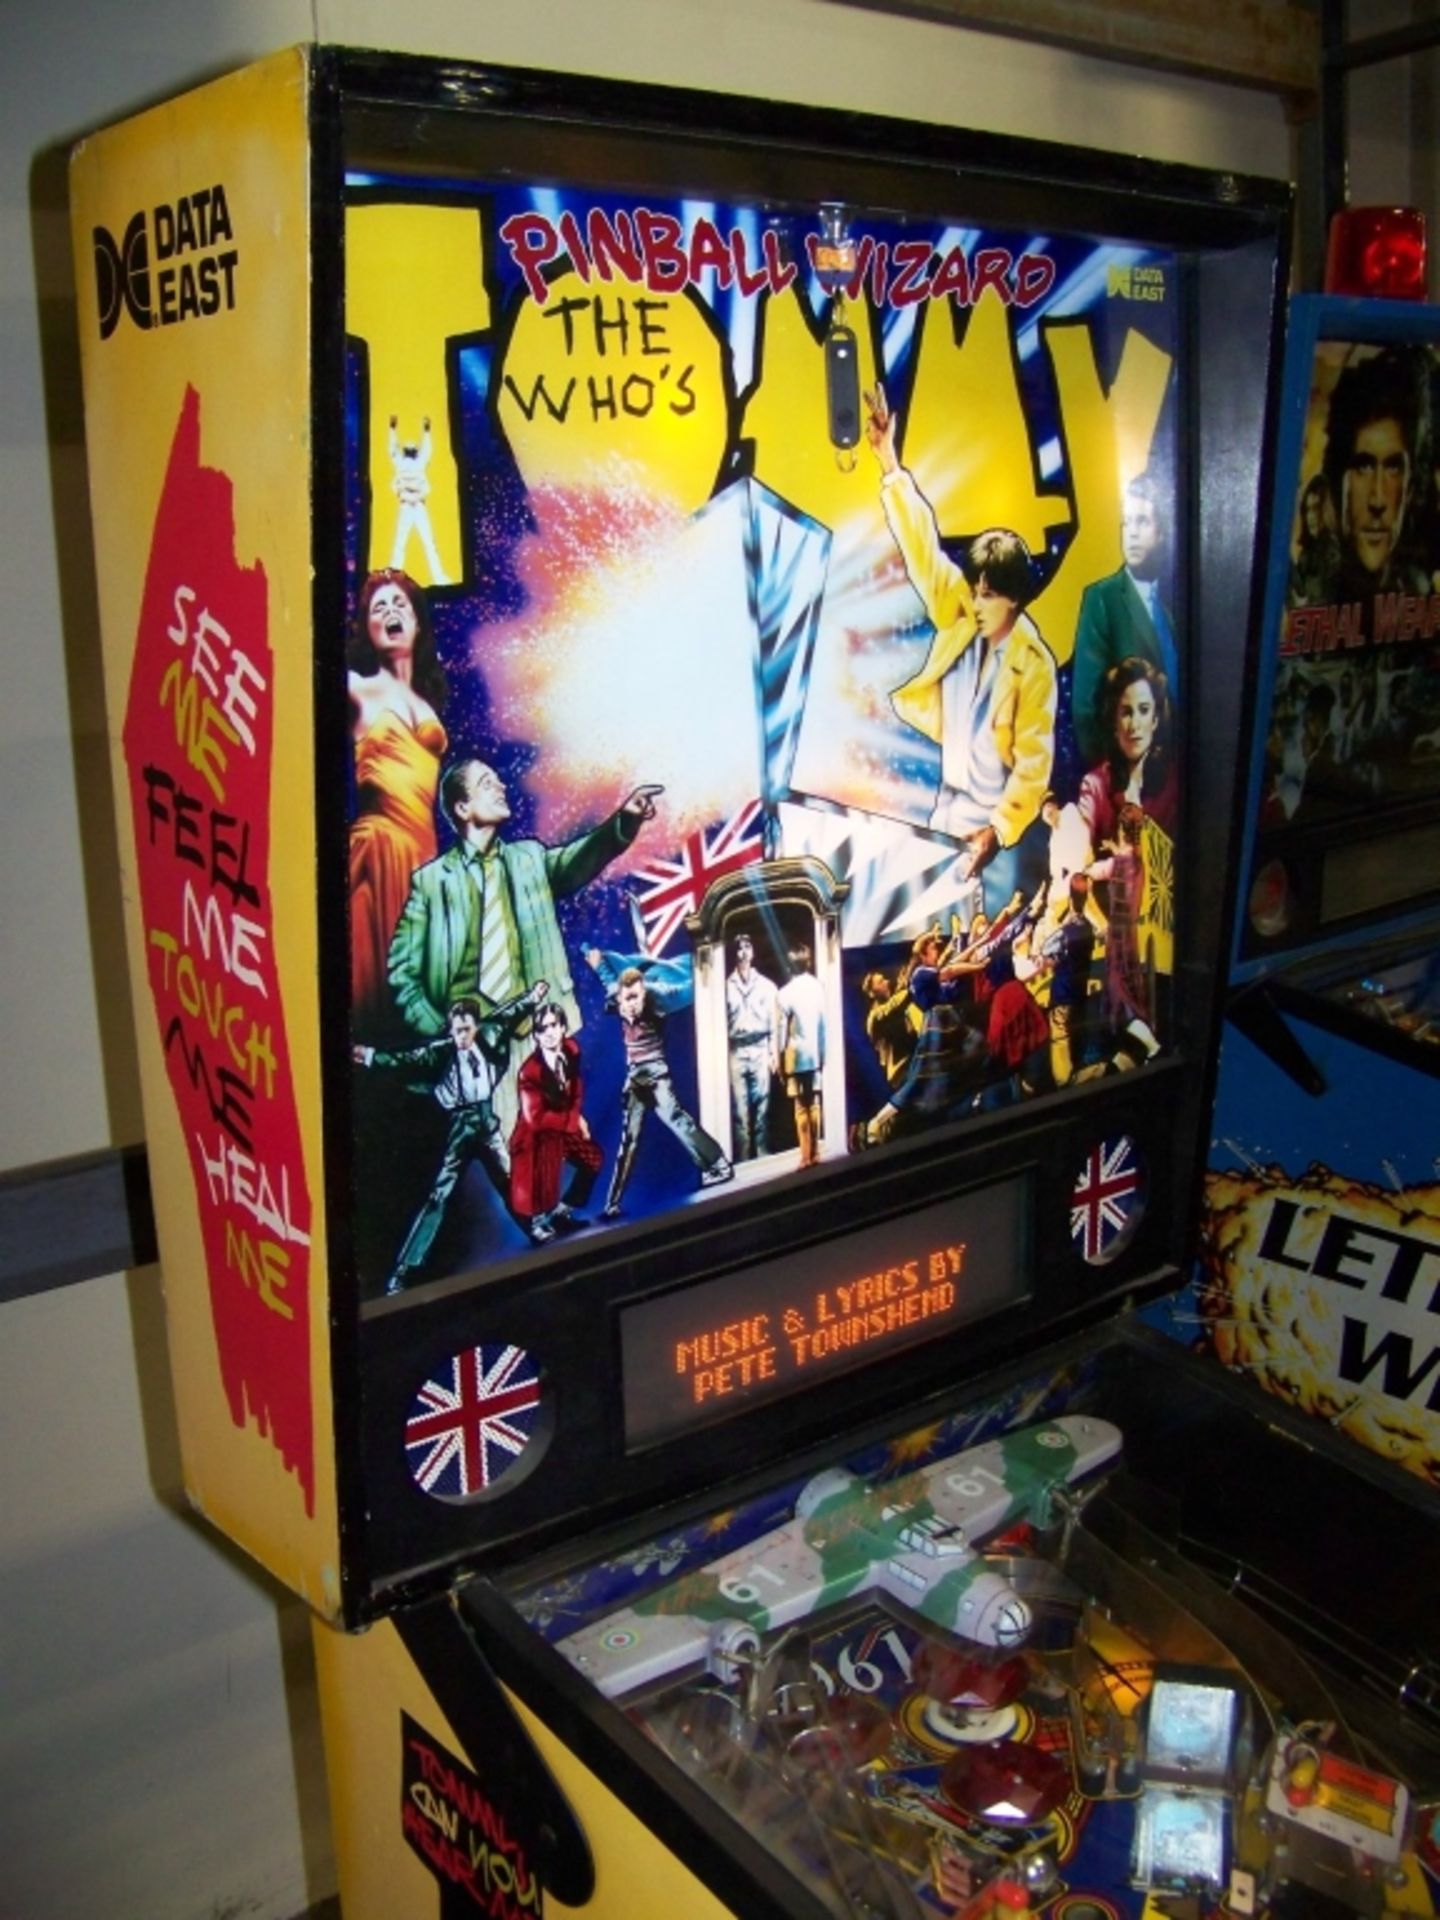 PINBALL WIZARD TOMMY THE WHO 1994 DATA EAST - Image 6 of 9